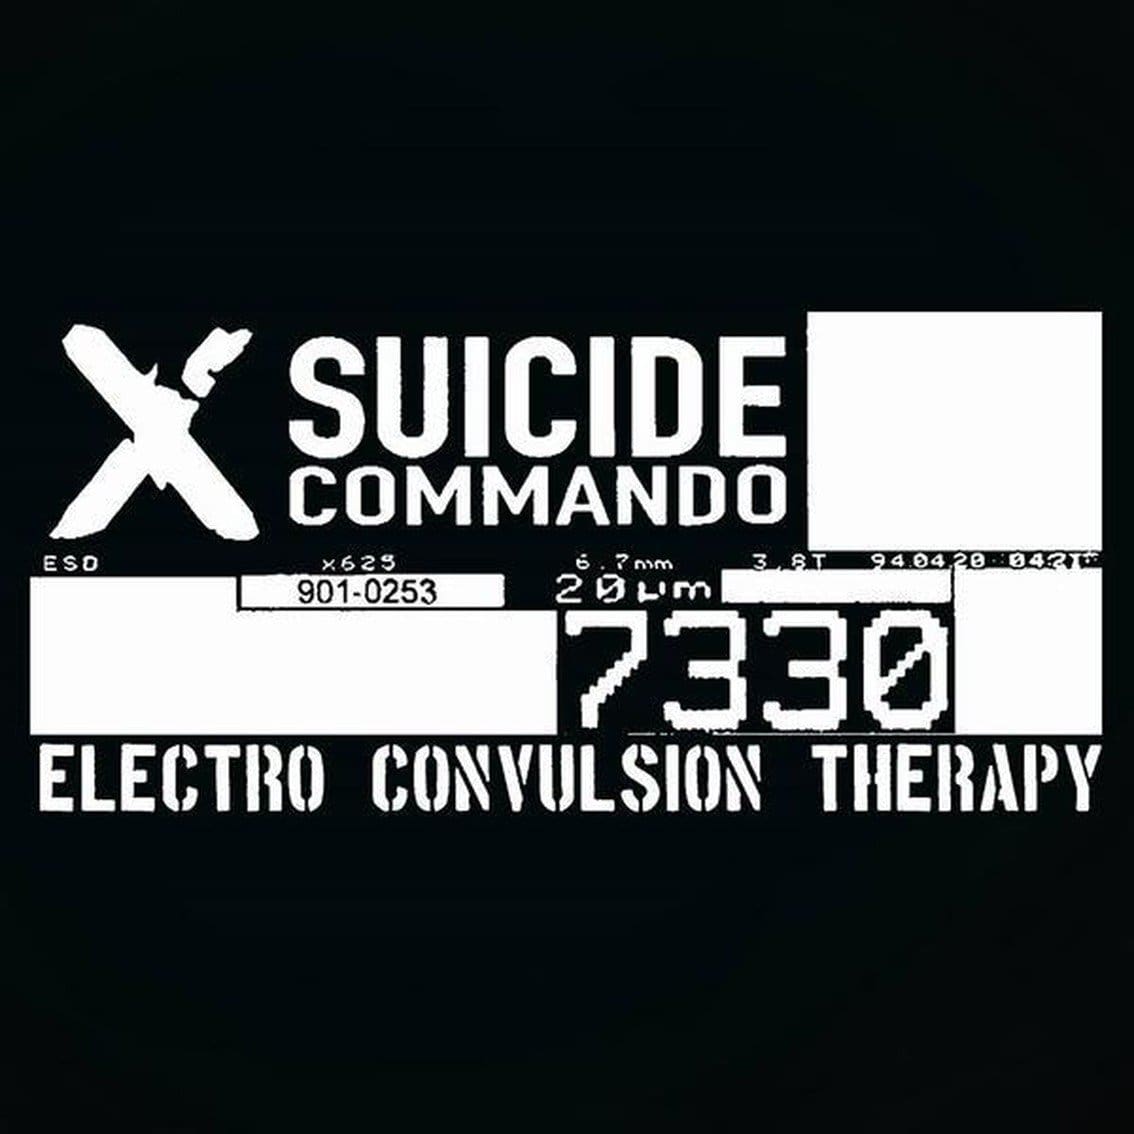 Super limited LP/CD released by Suicide Commando: 'Electro Convulsion Therapy' - order it now (or never get hold of it again)